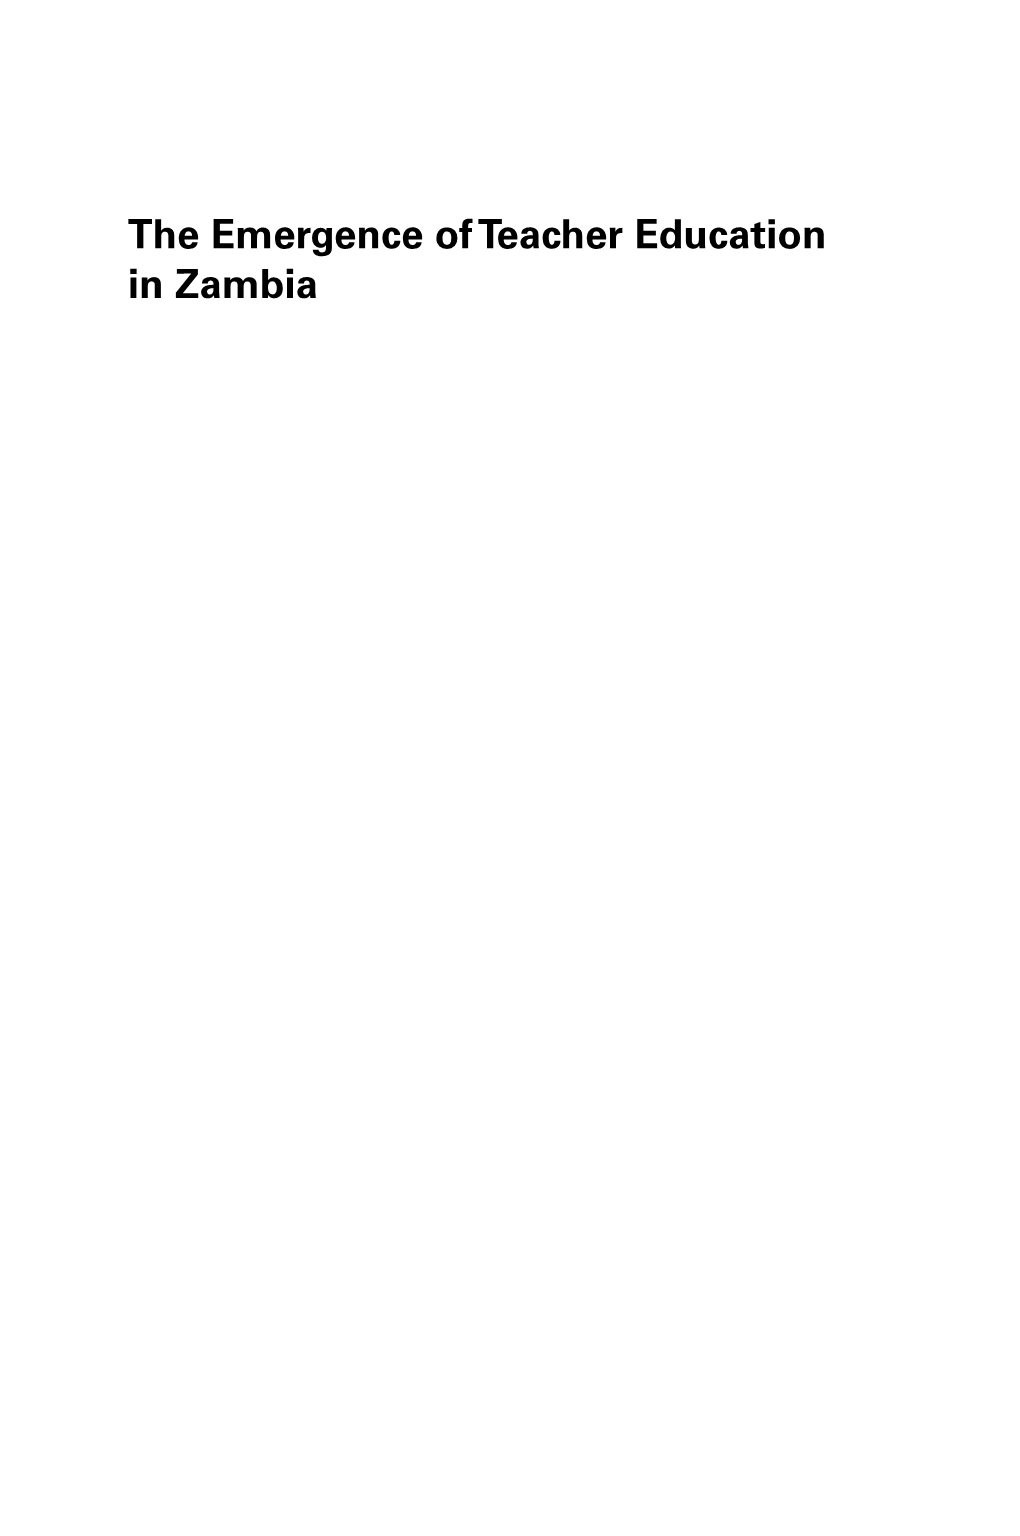 The Emergence of Teacher Education in Zambia EMERALD STUDIES in TEACHER PREPARATION in NATIONAL and GLOBAL CONTEXTS